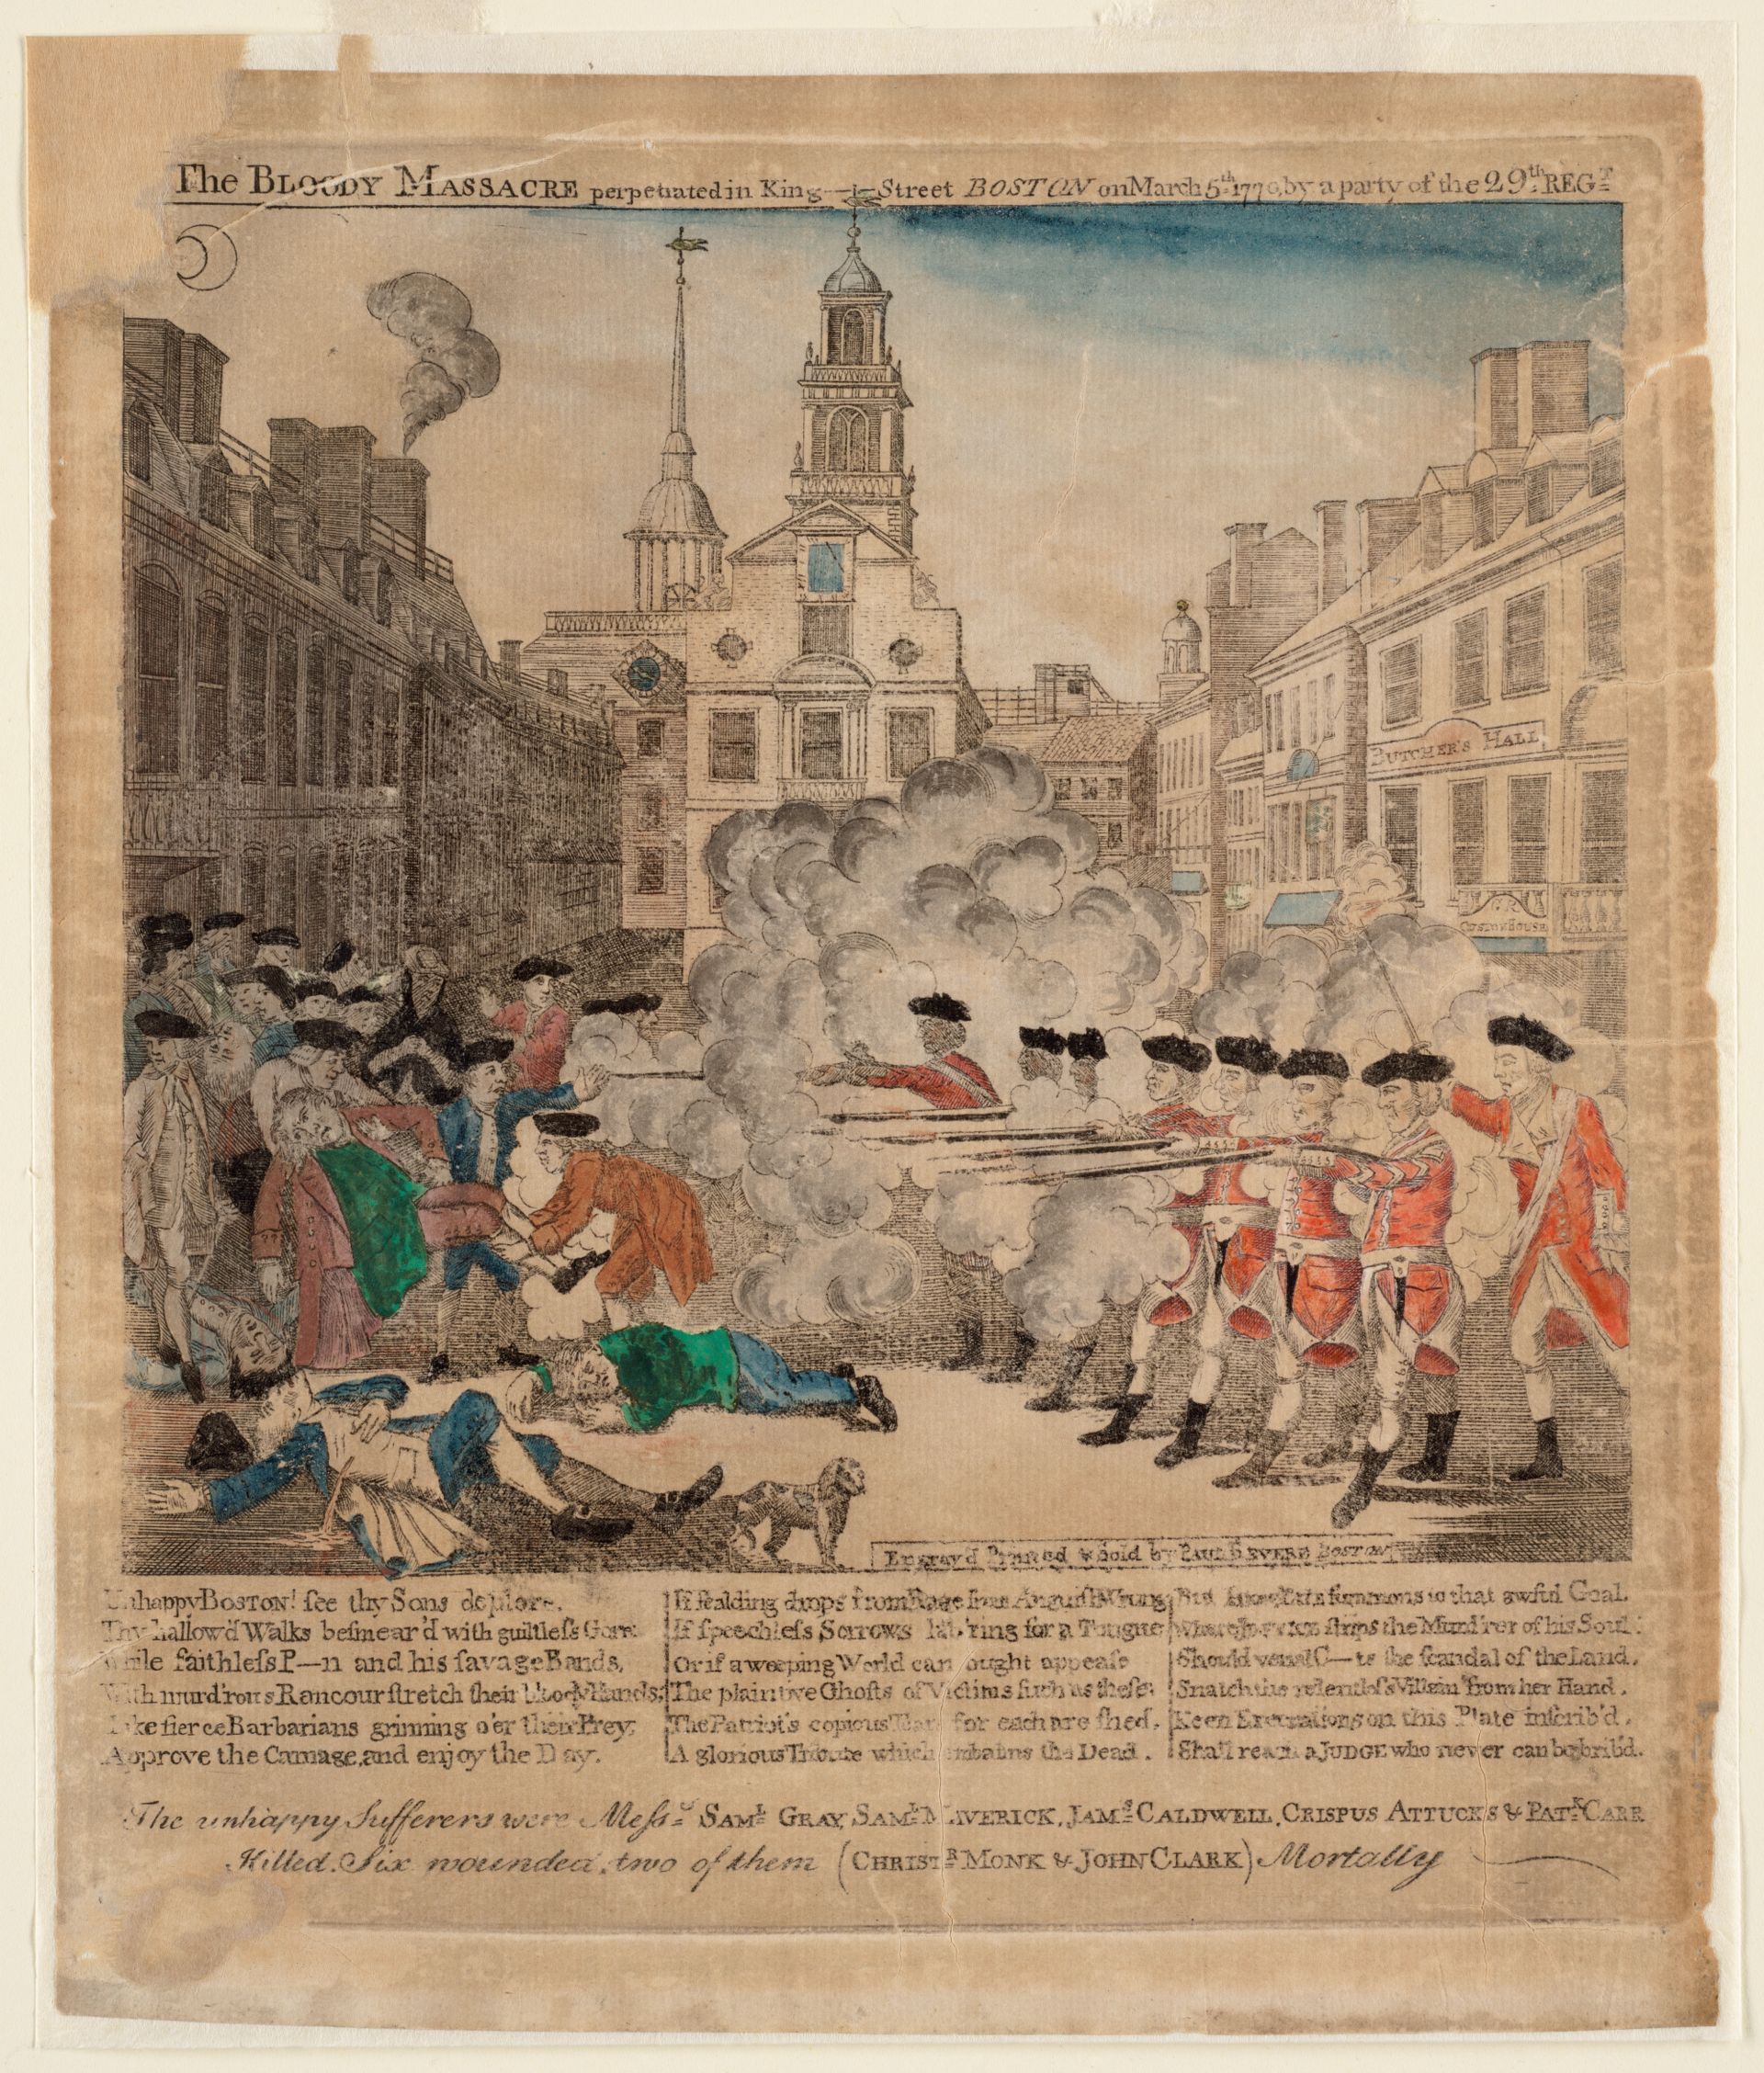 Colored print of British soldiers firing on crowd with text.